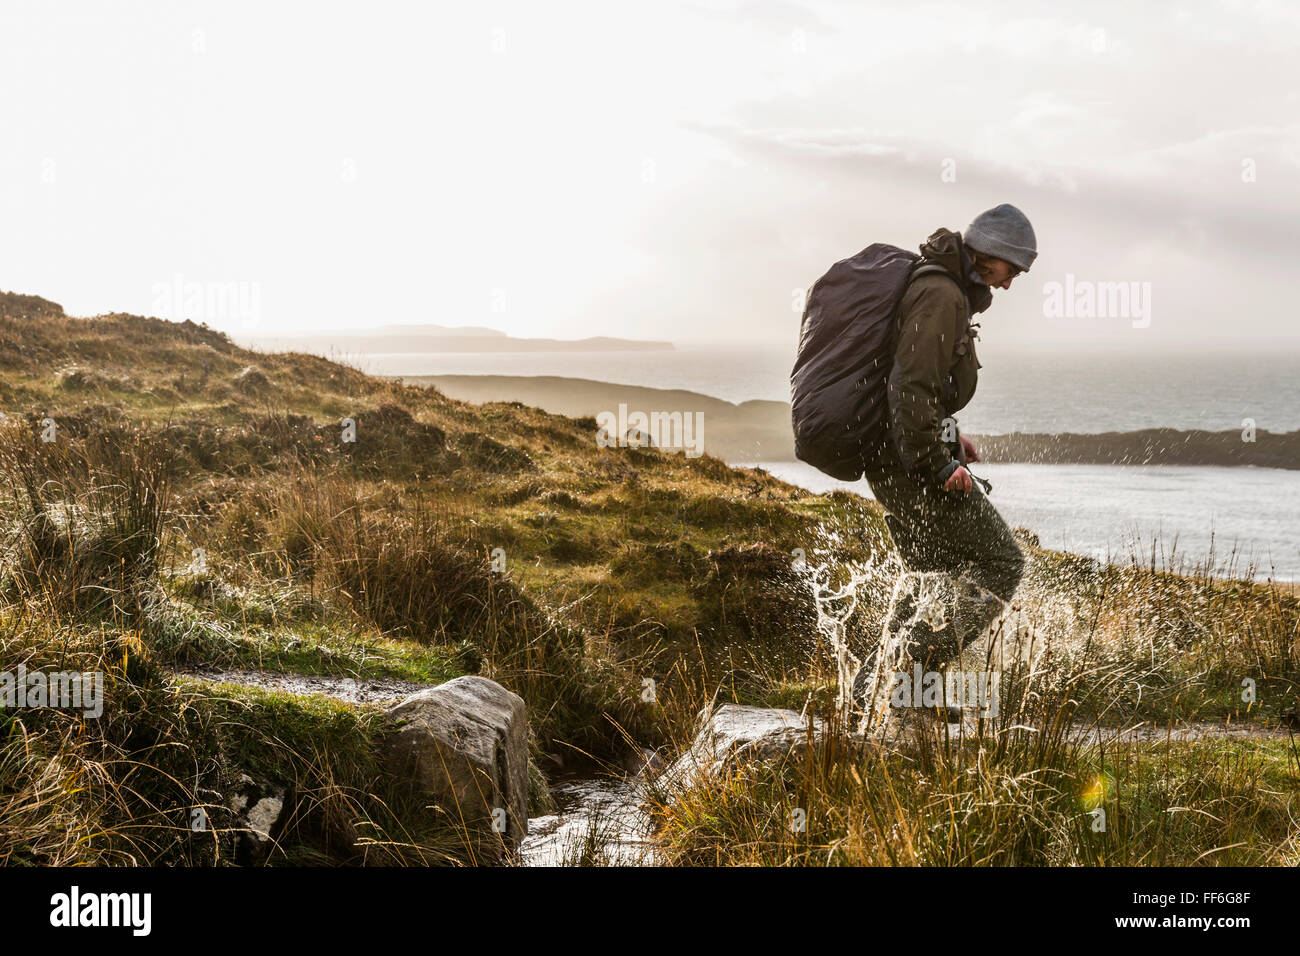 A man with a rucksack and winter clothing leaping across a small stream in an open exposed landscape. Stock Photo